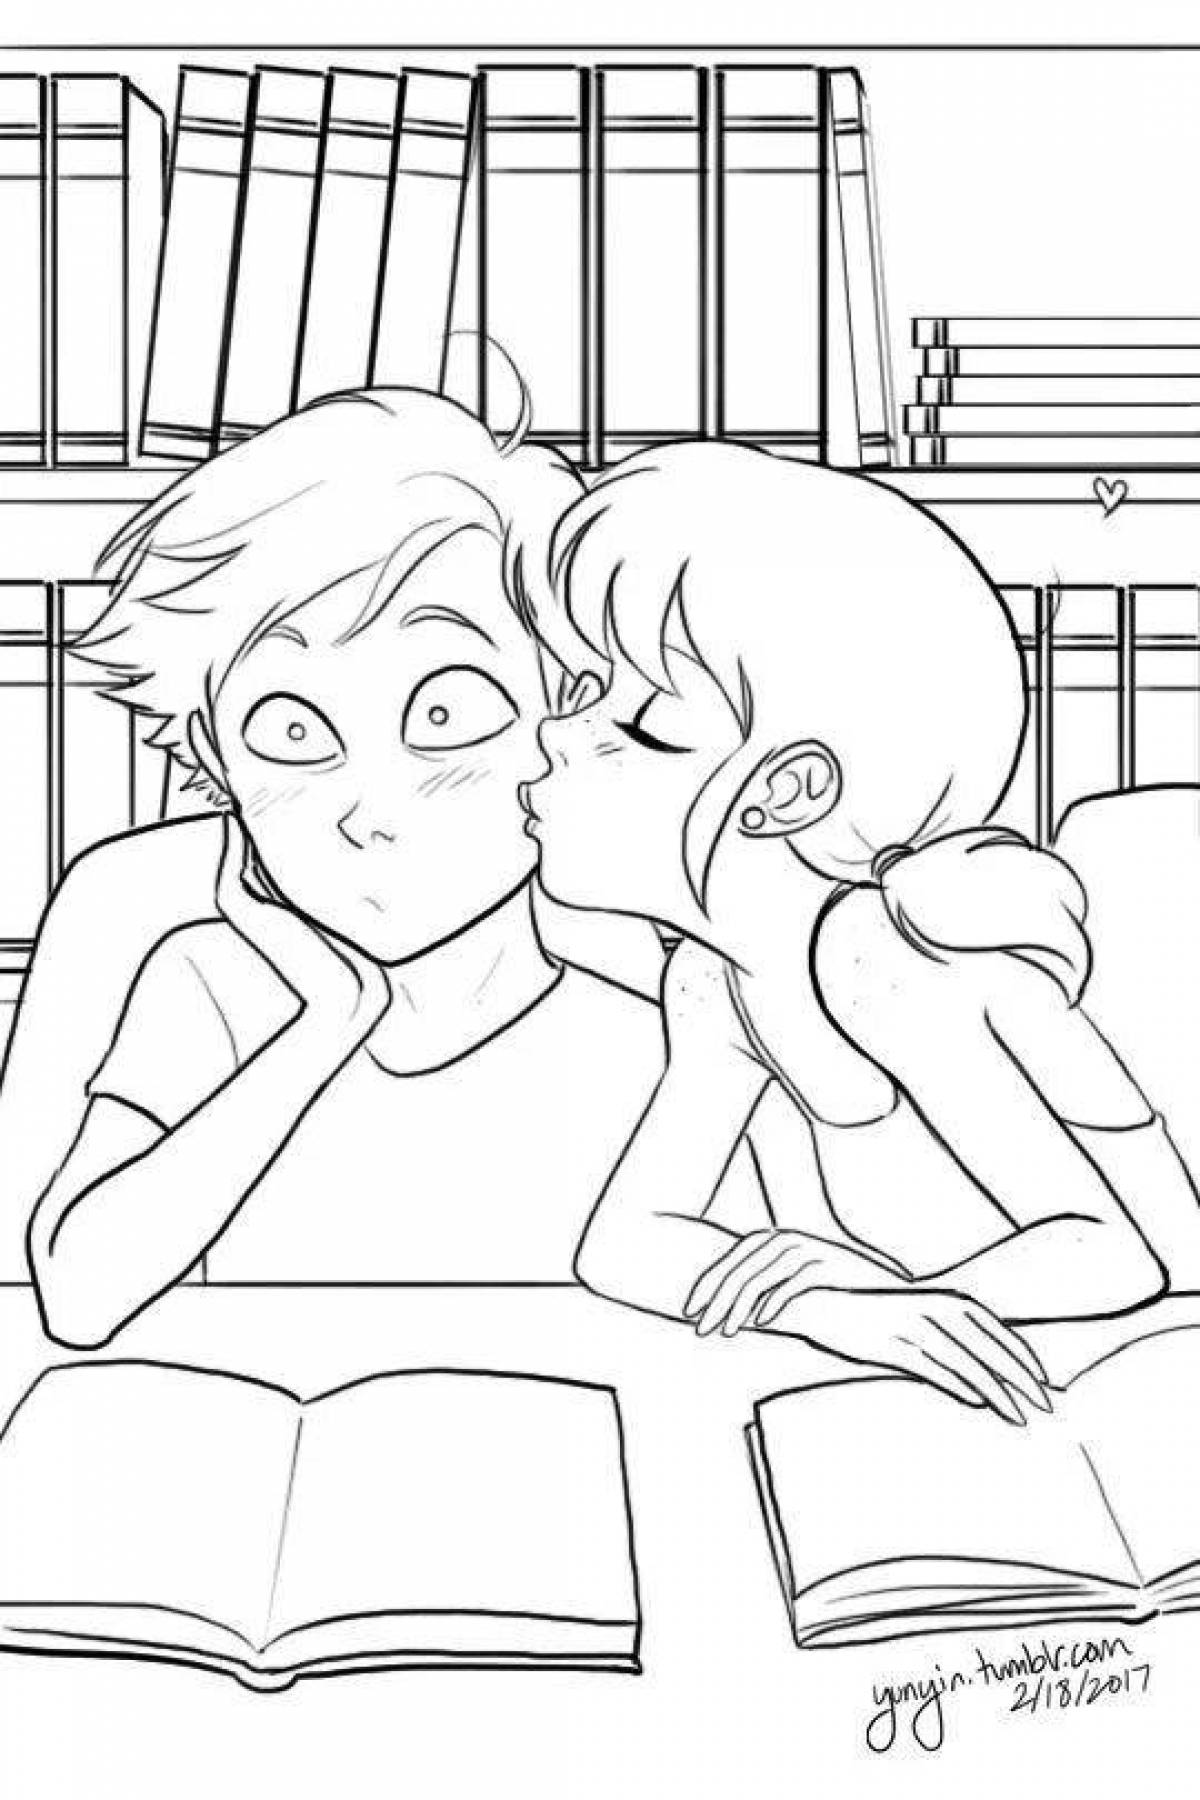 Marinette and adrian playful coloring page